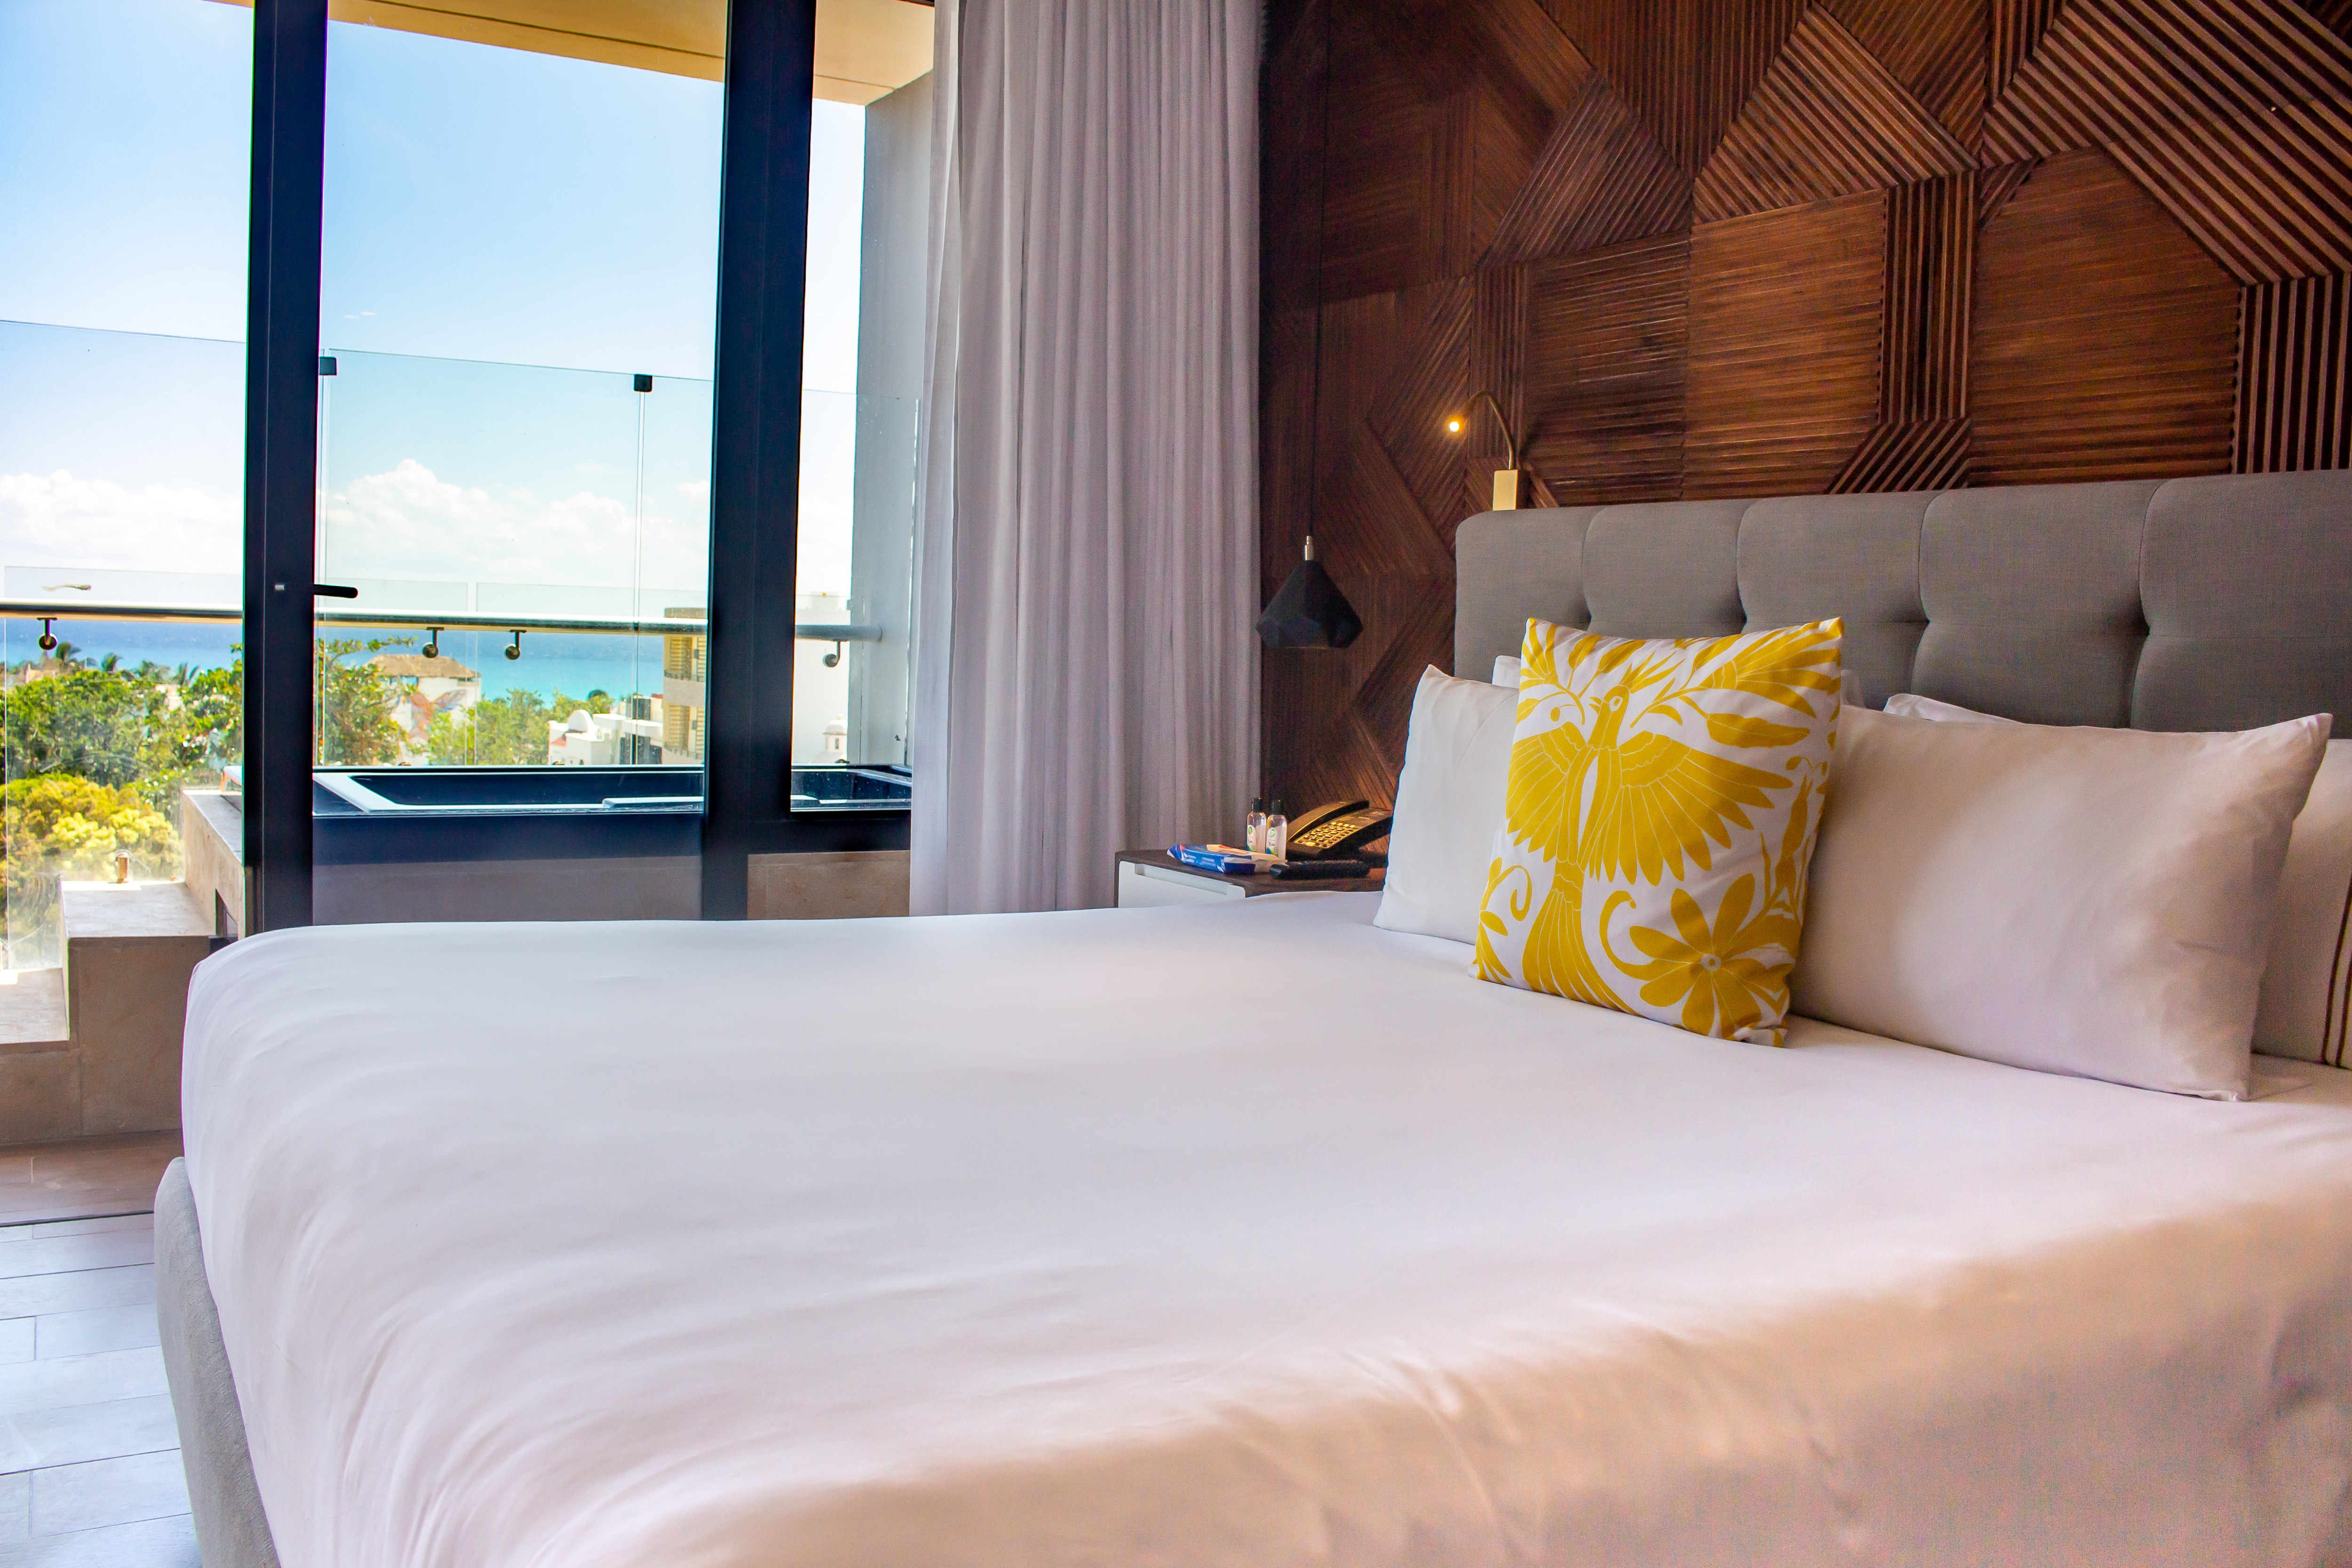 Large Bed in a Guest Room with Ocean View